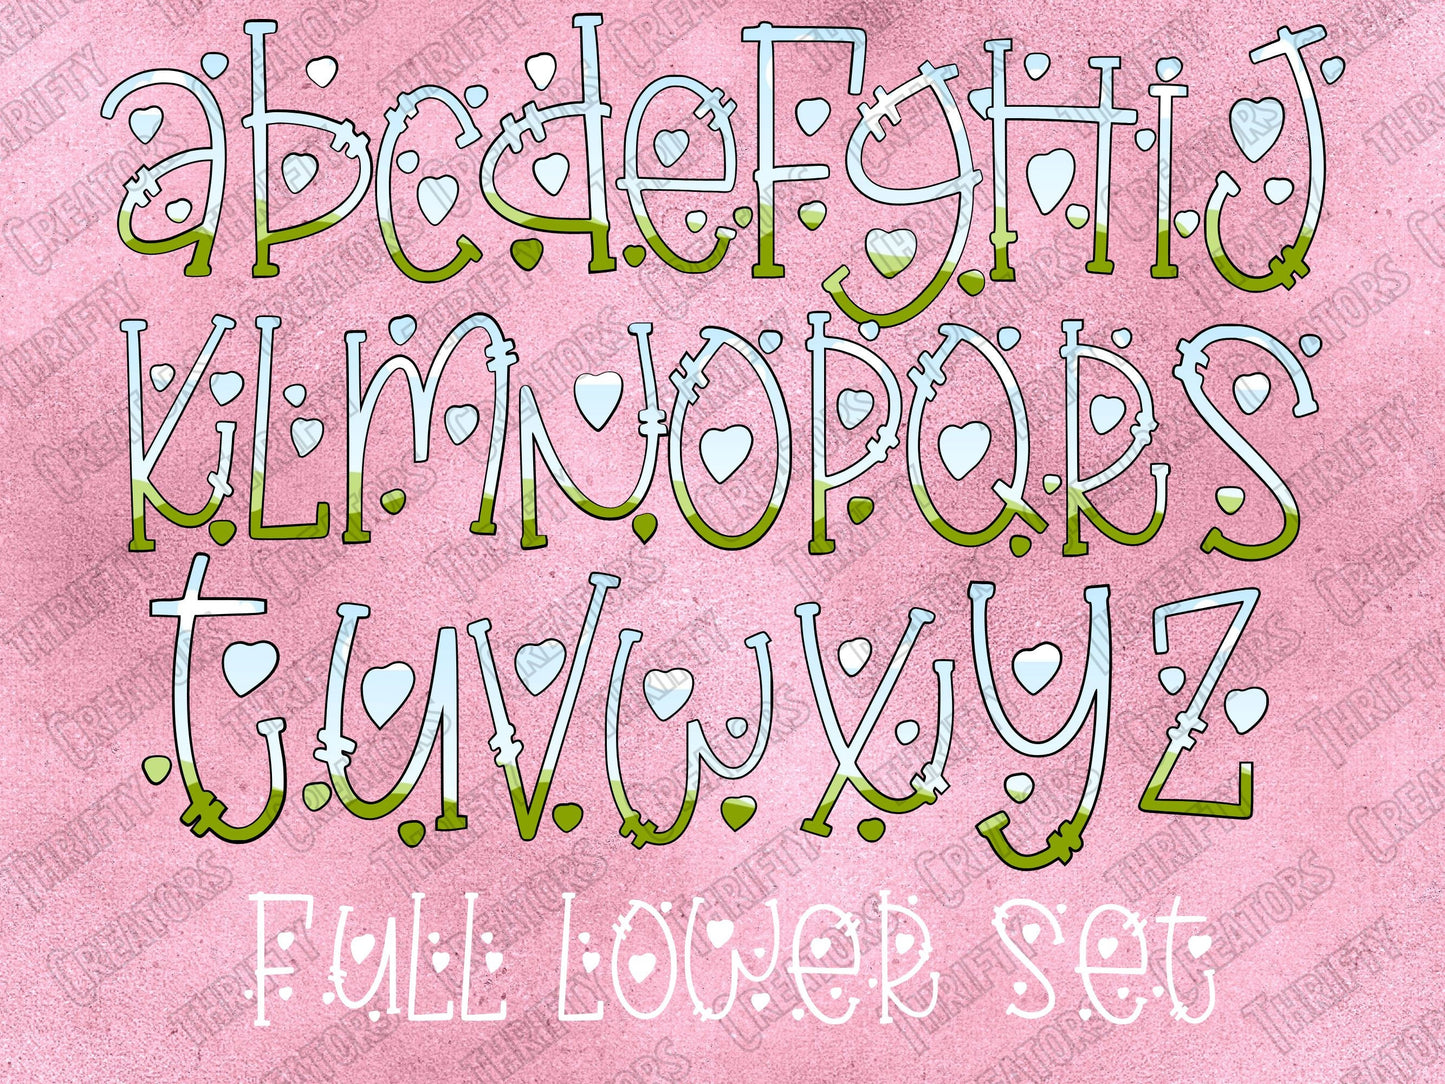 Fill your own Doodle Letters on CANVA with Commercial Use Allowed. Drag and Drop Alphaset Alphabet Letters PNG Editable Canva Frame Designs